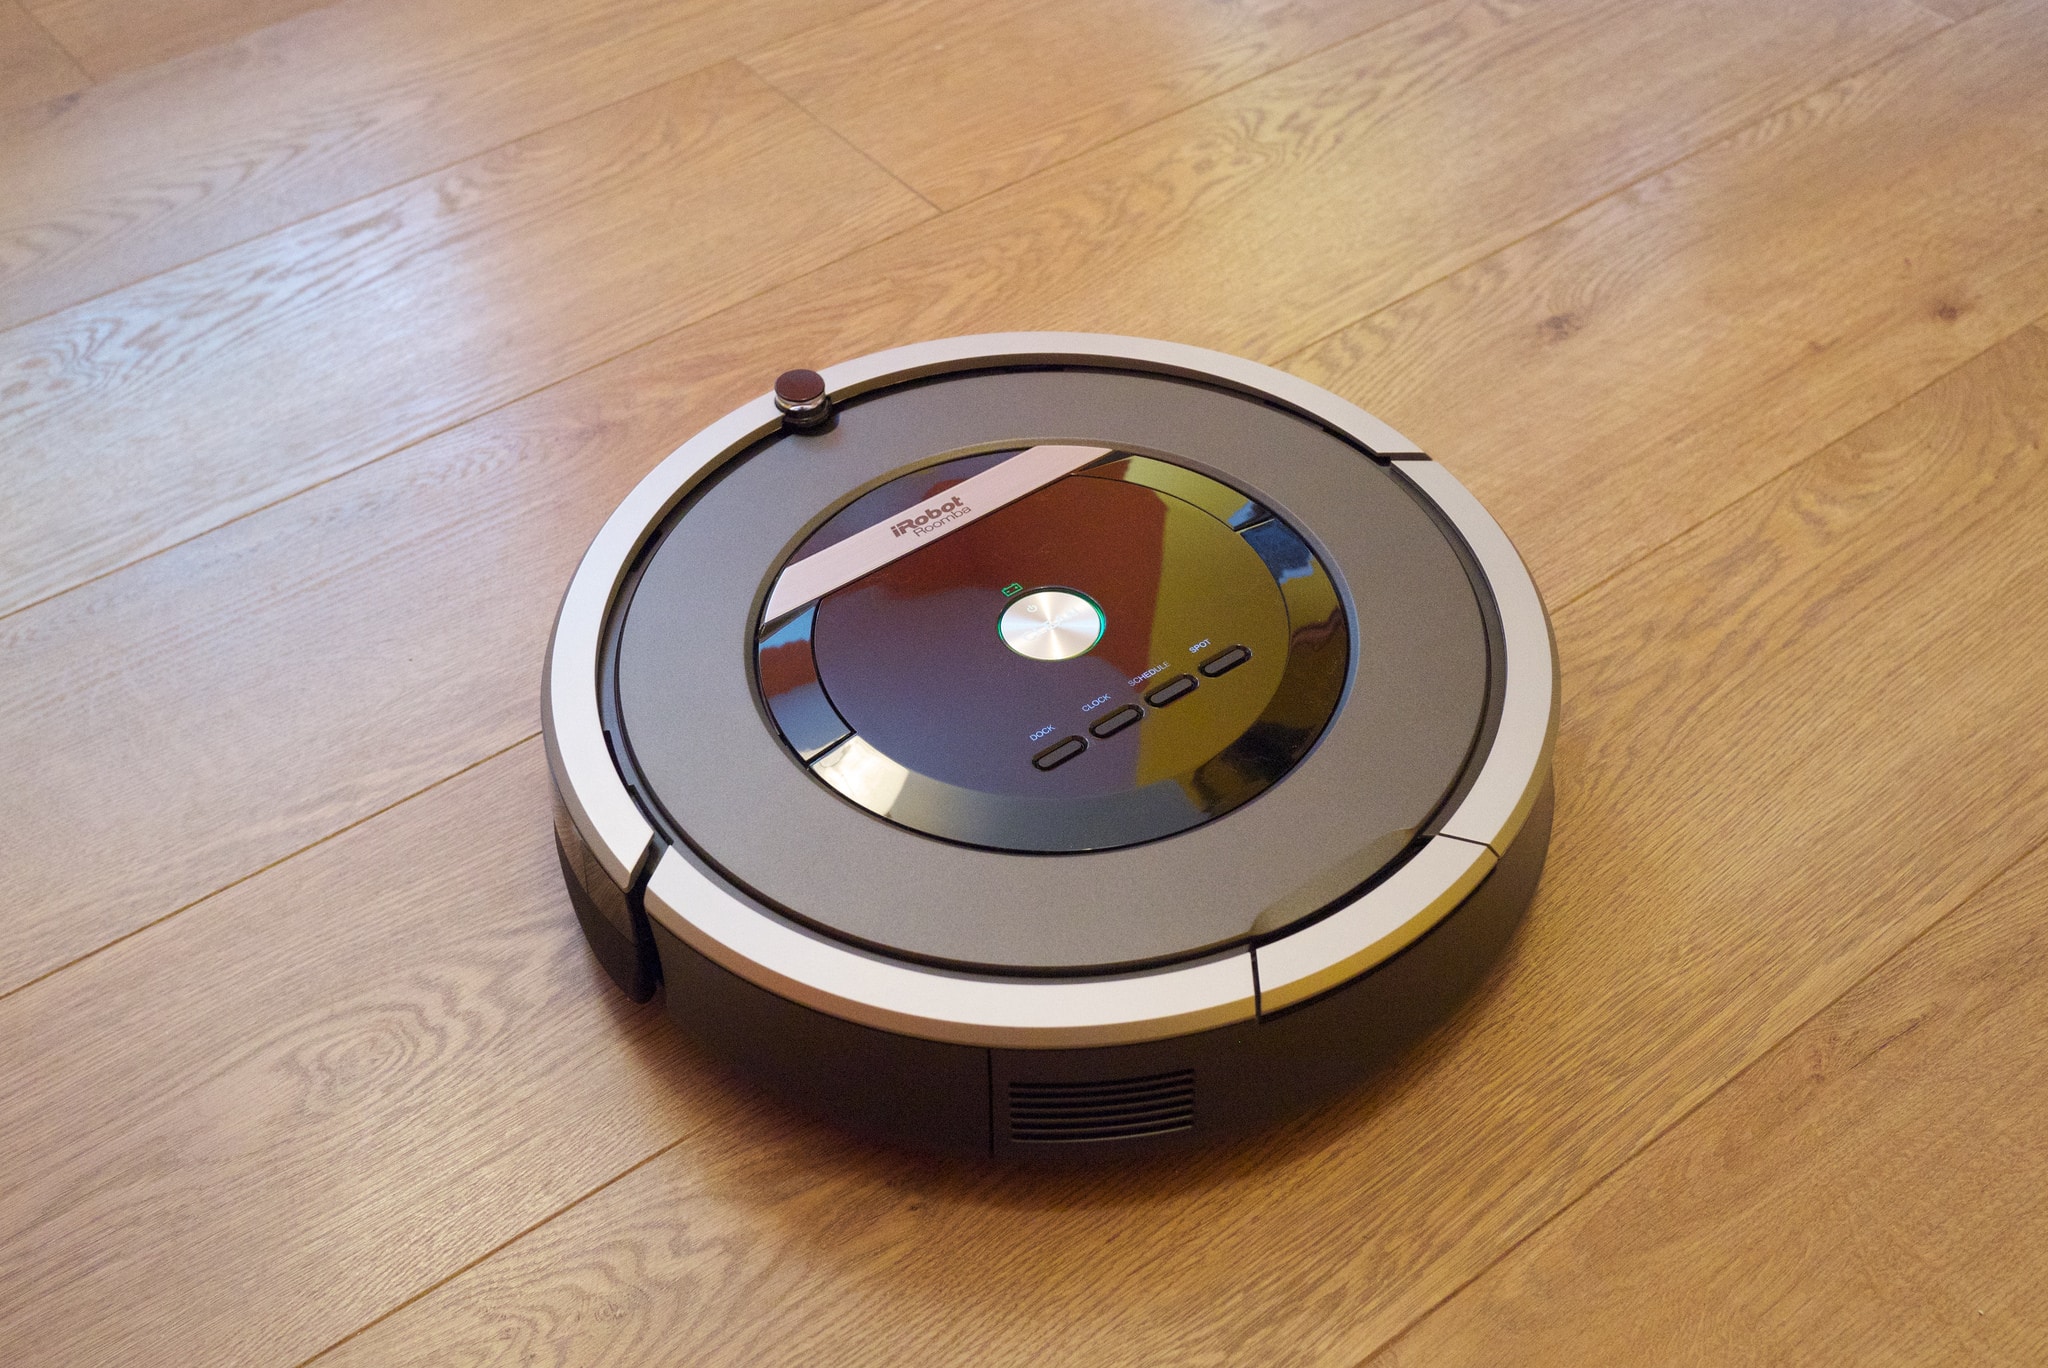 roomba 980, irobot roomba 980, irobot 980, 980, irobot roomba 980 robot vacuum, roomba 990, i roomba 980, new roomba, irobot roomba 980 vacuum cleaning robot, r980020, roomba latest model, roomba reviews